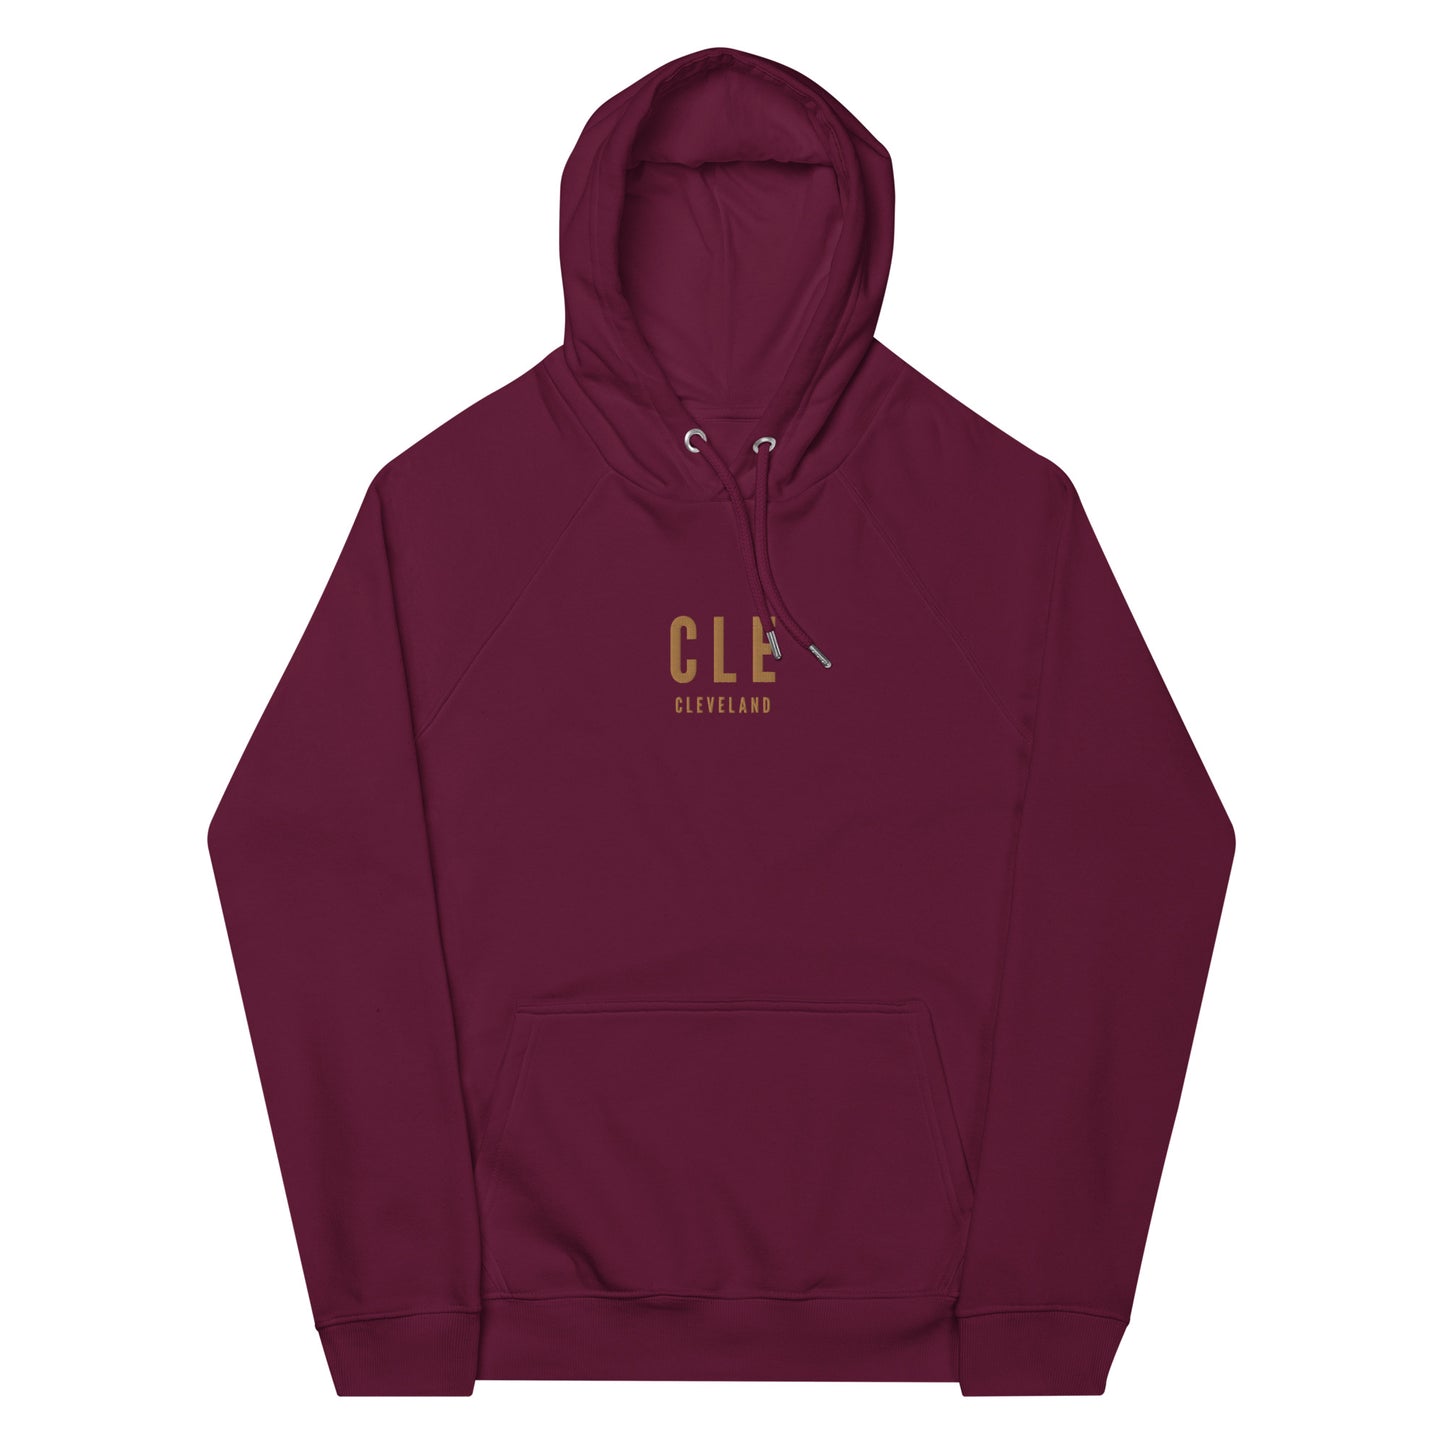 City Organic Hoodie - Old Gold • CLE Cleveland • YHM Designs - Image 11